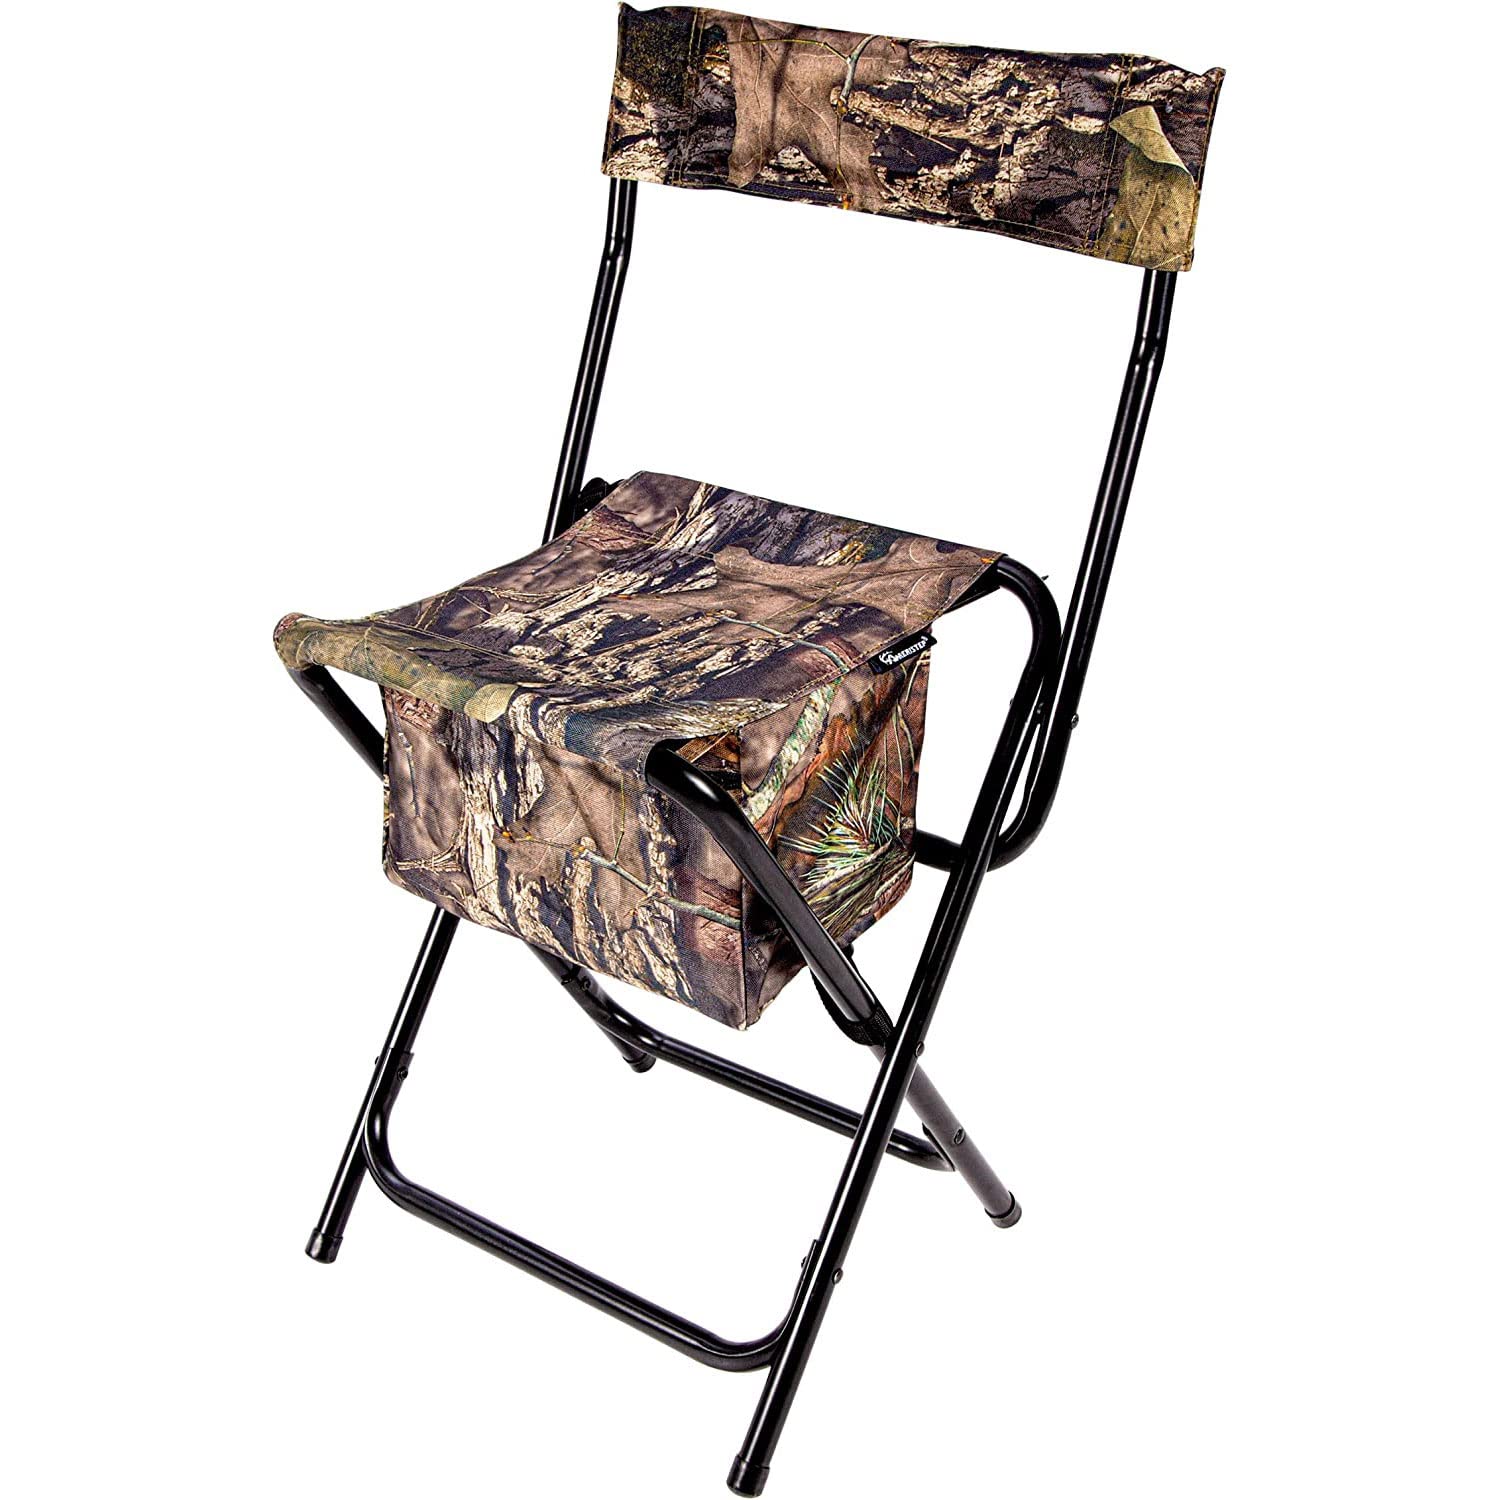 AMERISTEP Hunting Foldable Design Portable Lightweight High-Back Blind Chair with Backrest, Mossy Oak Break-up Country